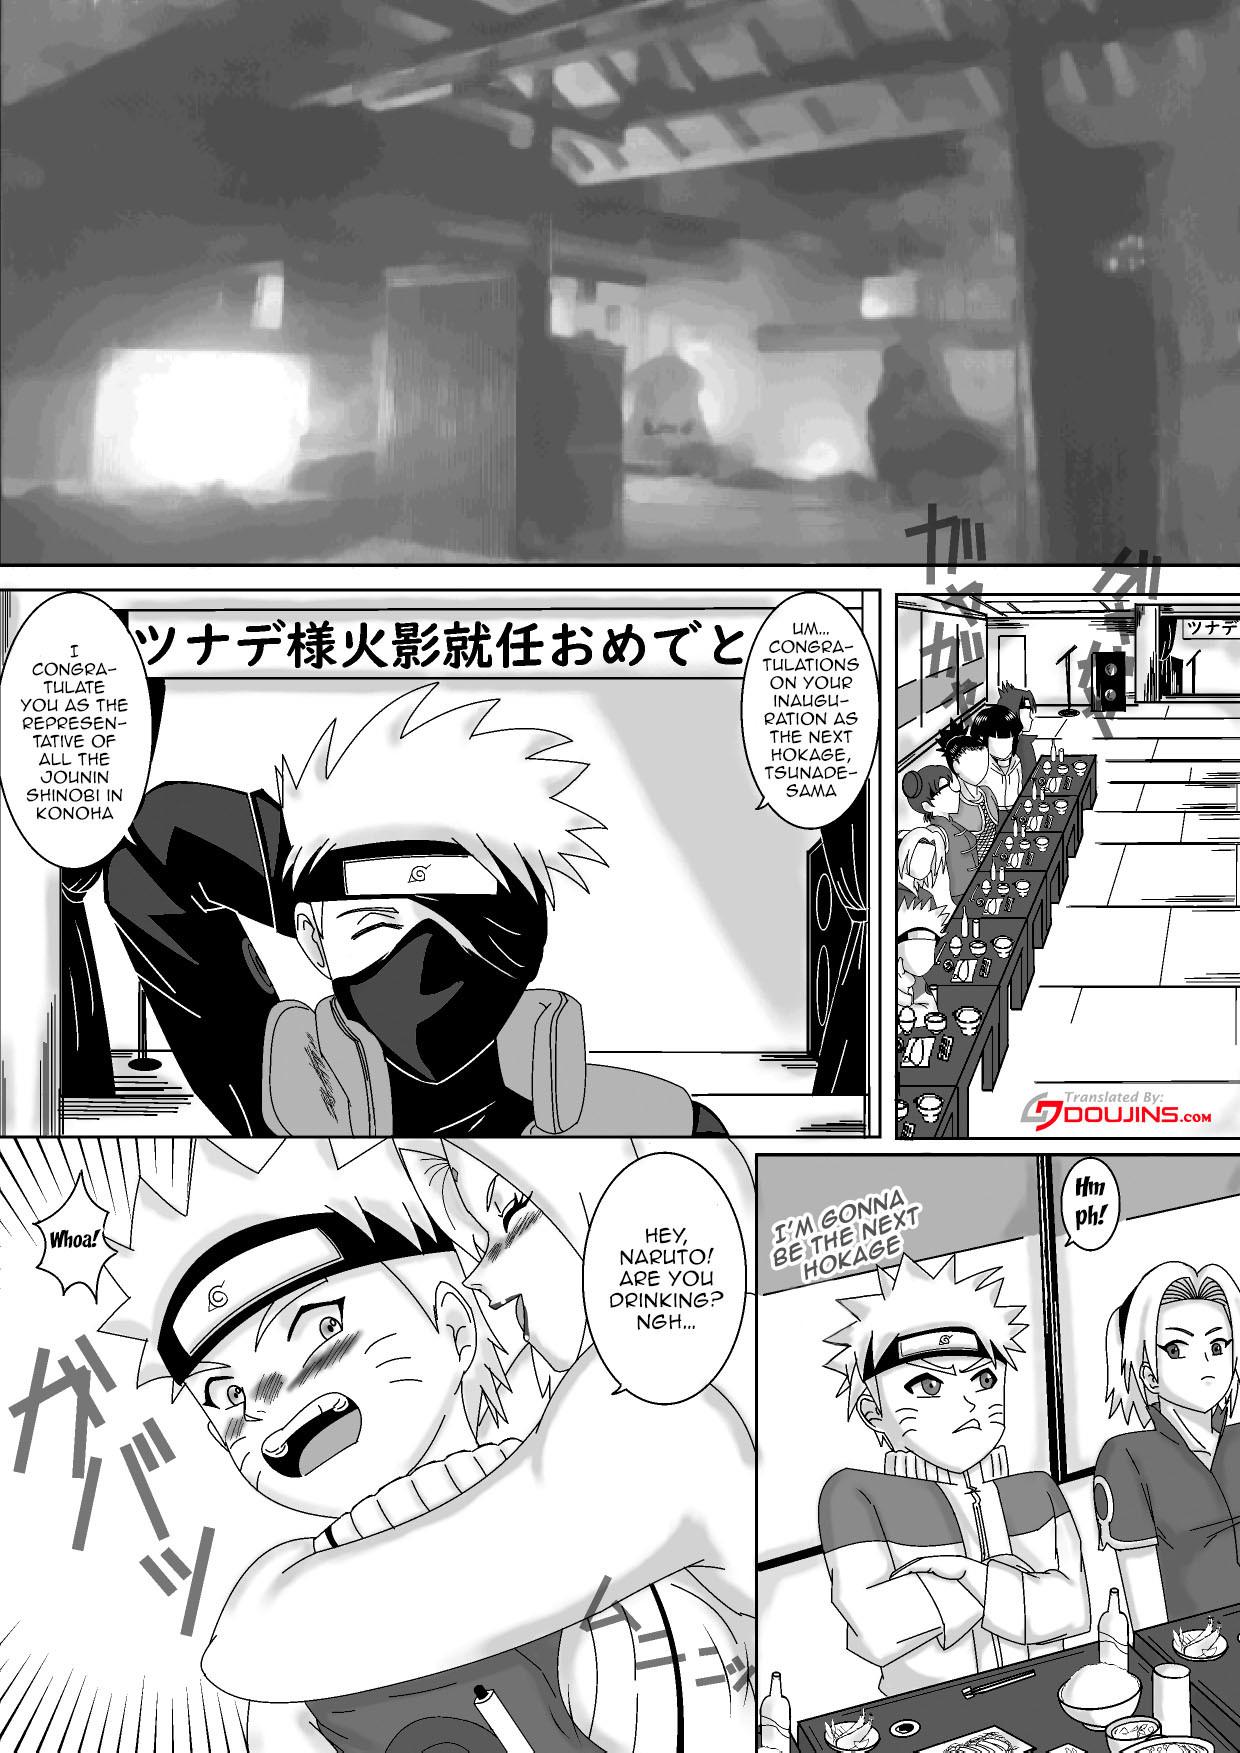 Van Nomisugite Deisui Shita BBA to Yarimakutta Ken!! | The Case Of Having Sex With This Old Lady After She Got Herself Really Drunk - Naruto Big breasts - Page 2